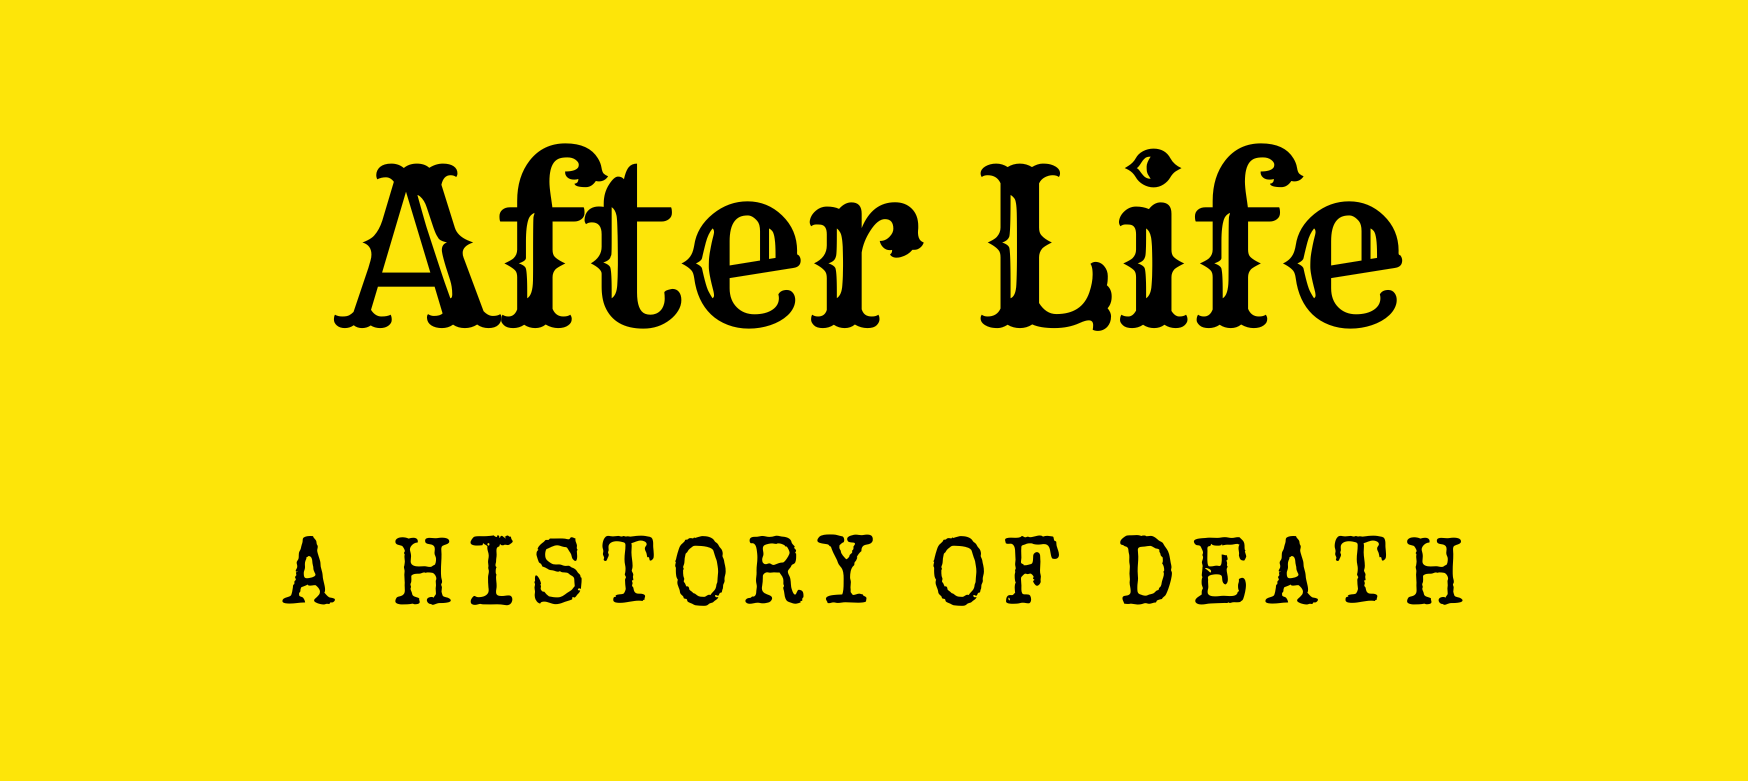 after_life.png | Royal College of Physicians of Edinburgh